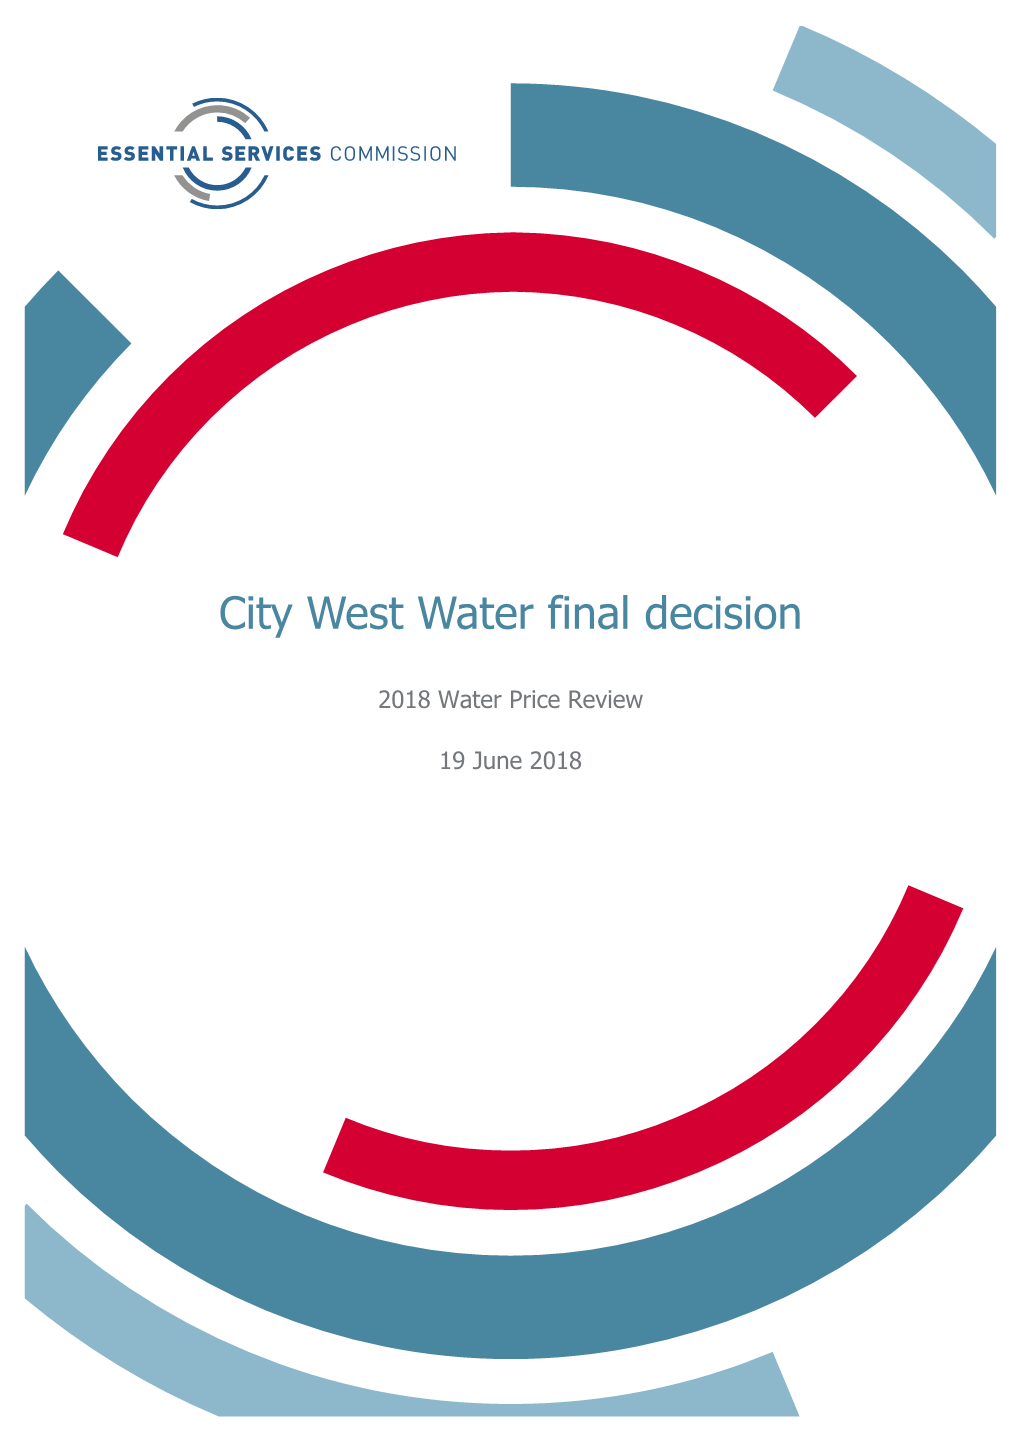 City West Water Final Decision